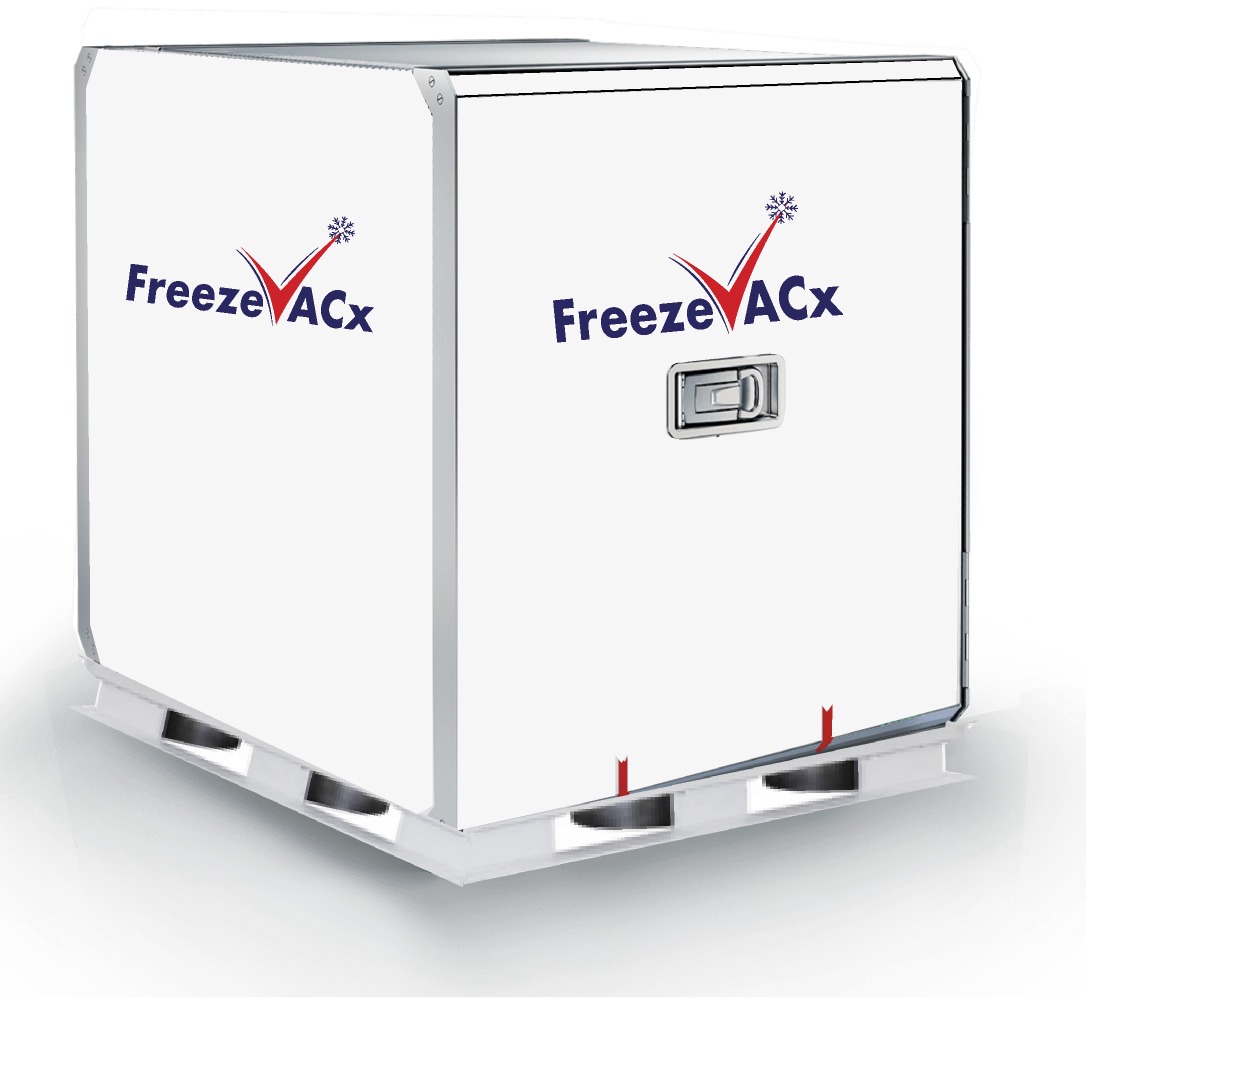 Freezevacx Introduces Vaccine Freezers for Aircrafts; Online Product Reviewer Calls It Creative and Innovative.